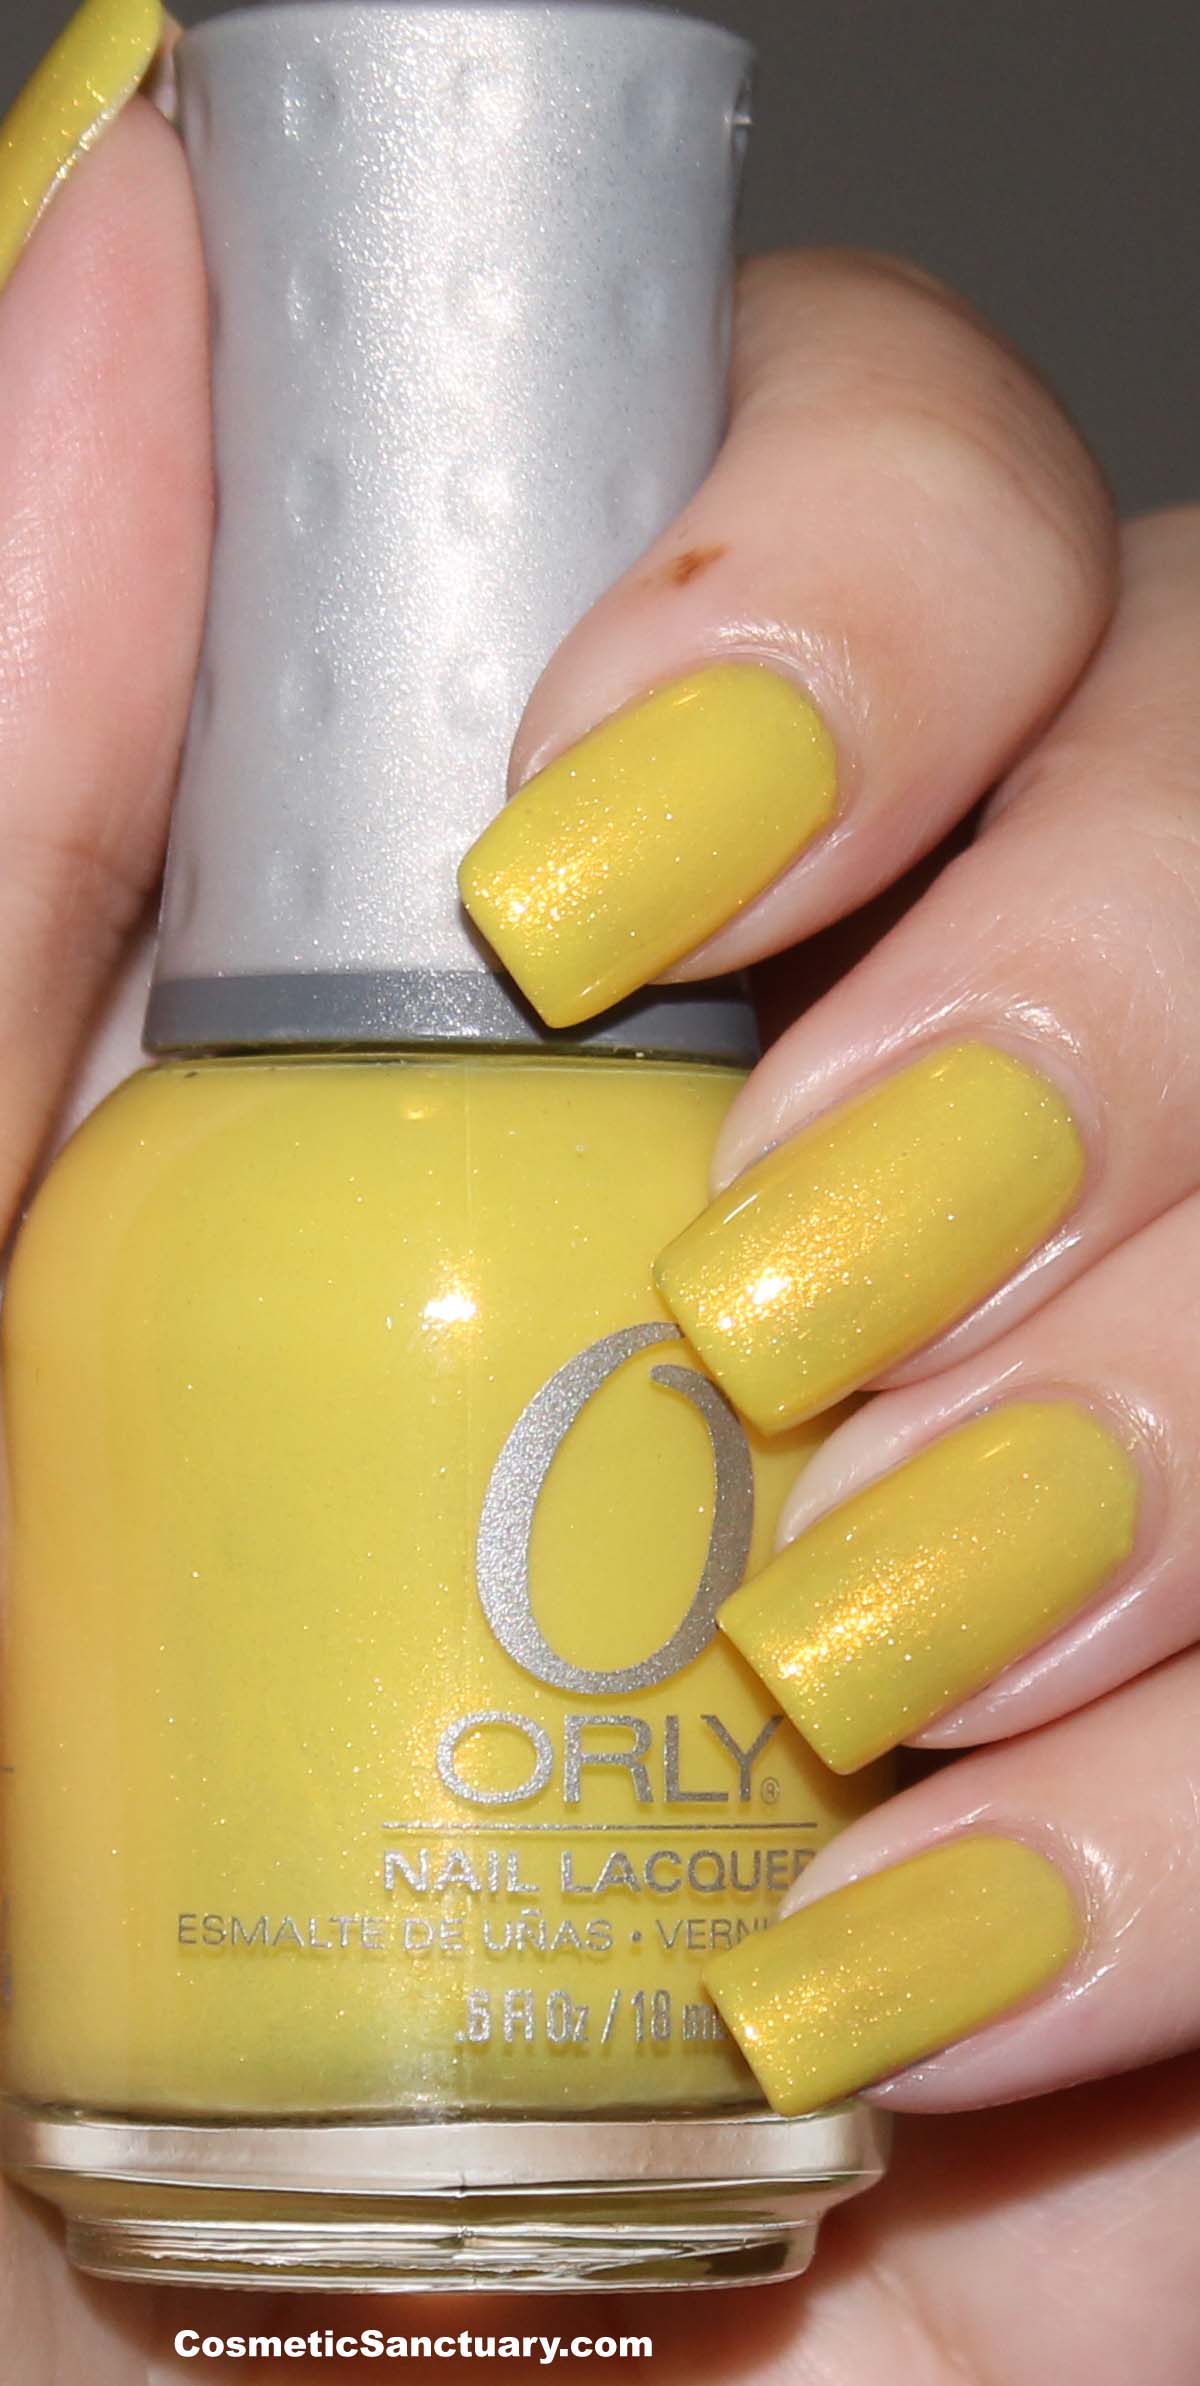 China Glaze and Orly Swatches from BeautyStopOnline.com!